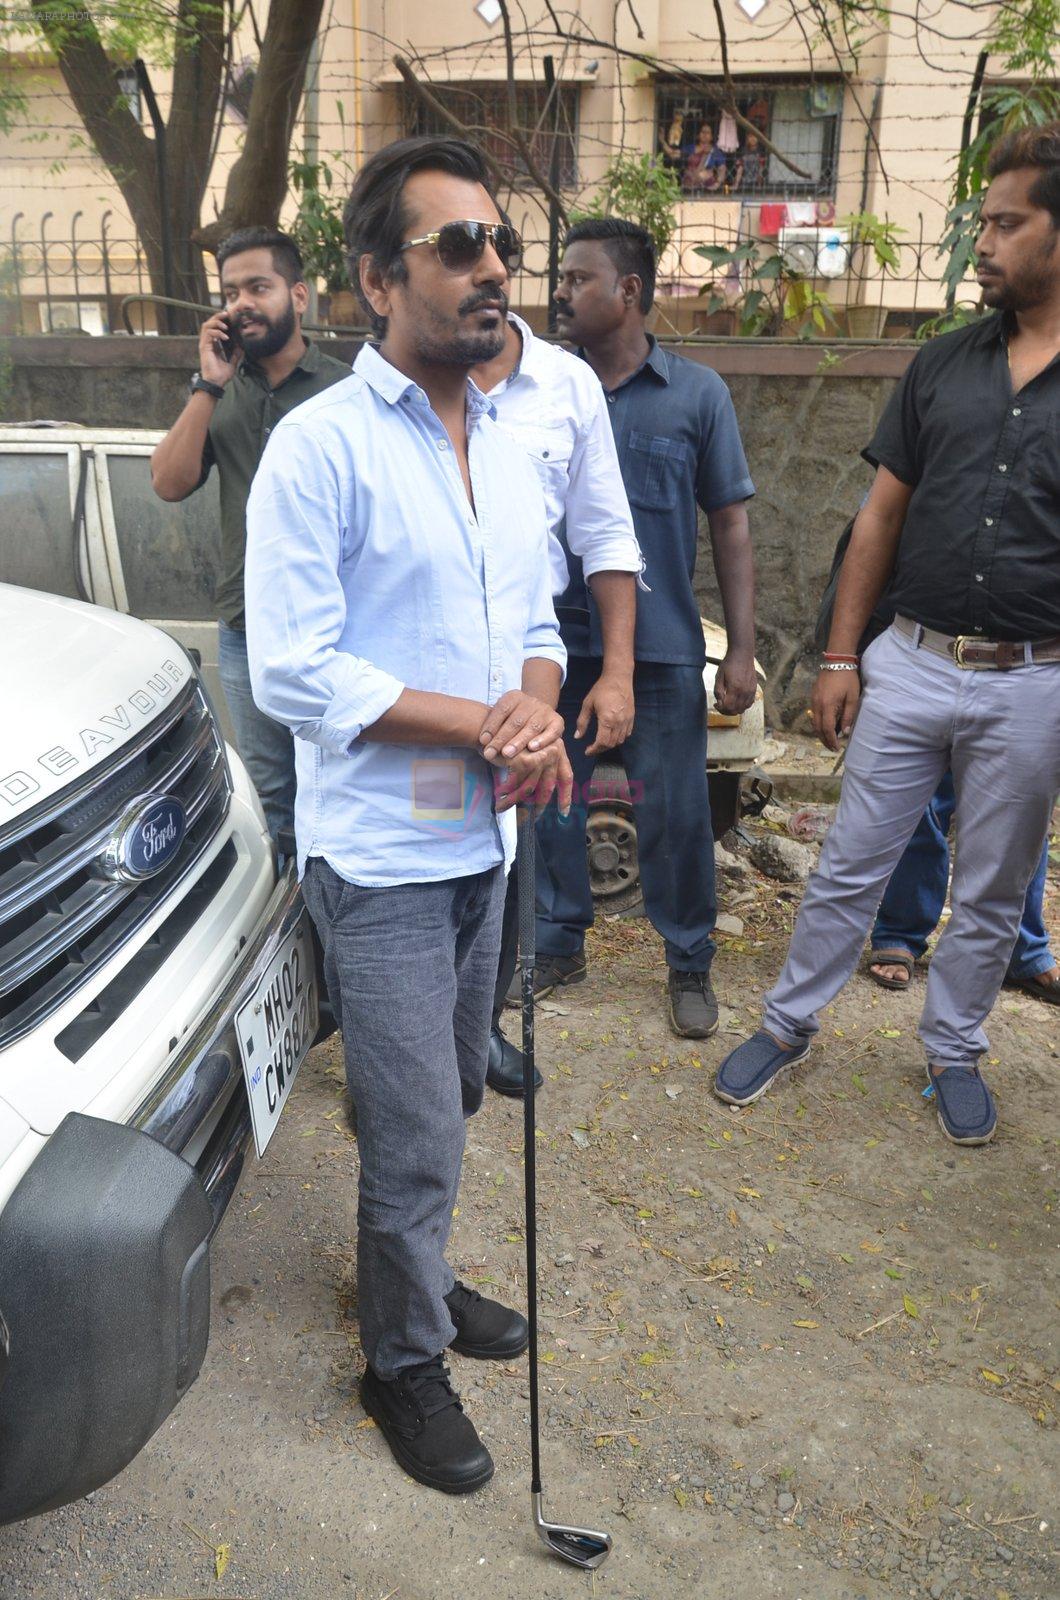 Nawazuddin Siddiqui promote their forthcoming film Freaky Ali by playing golf on the streets of Mumbai on 7th Sept 2016